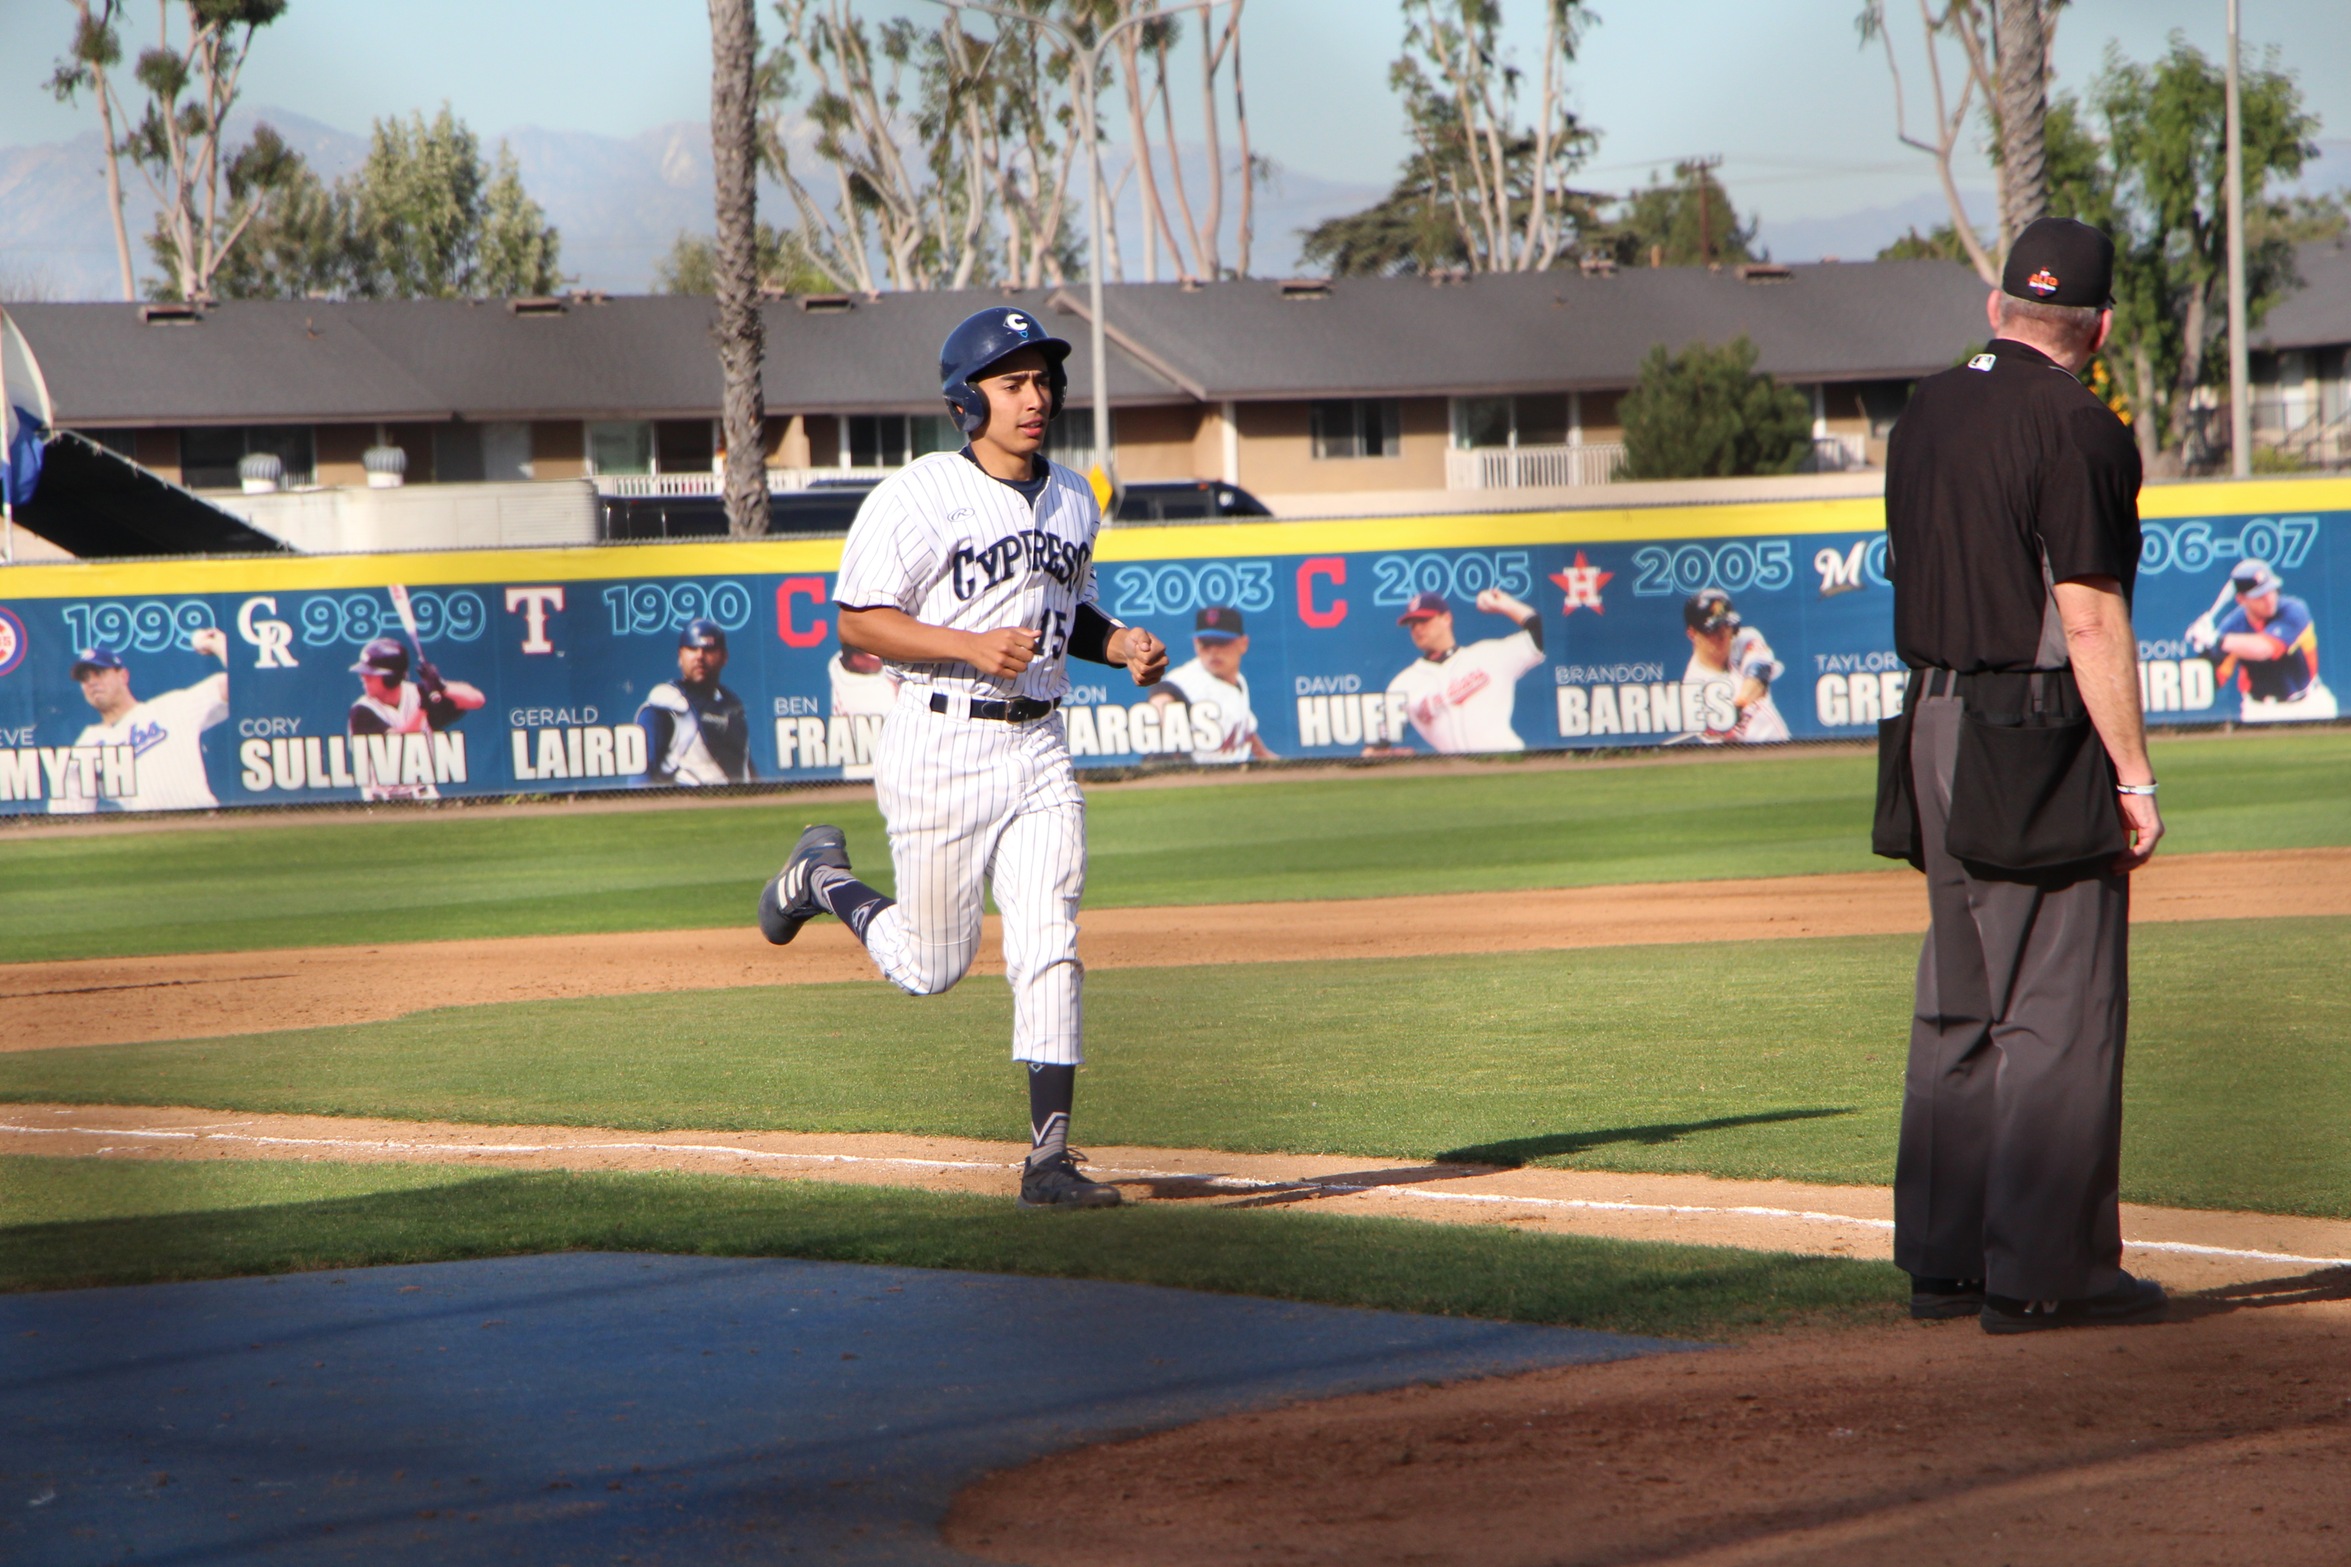 9th Inning Rally Falls Short, Chargers Lose 6-5